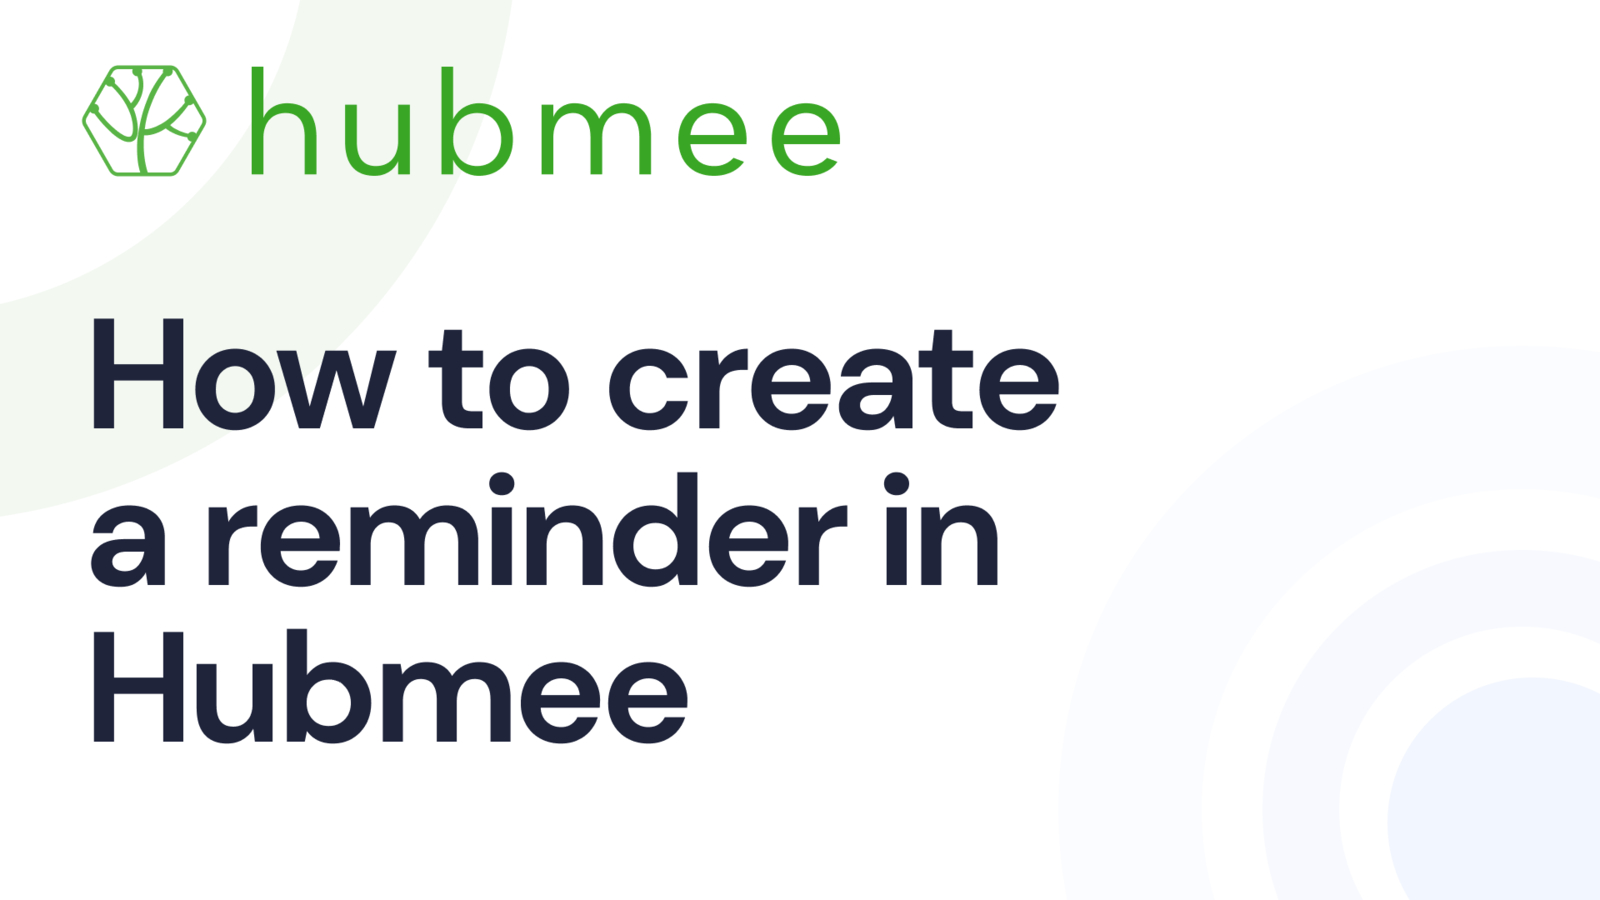 How to create a reminder in Hubmee